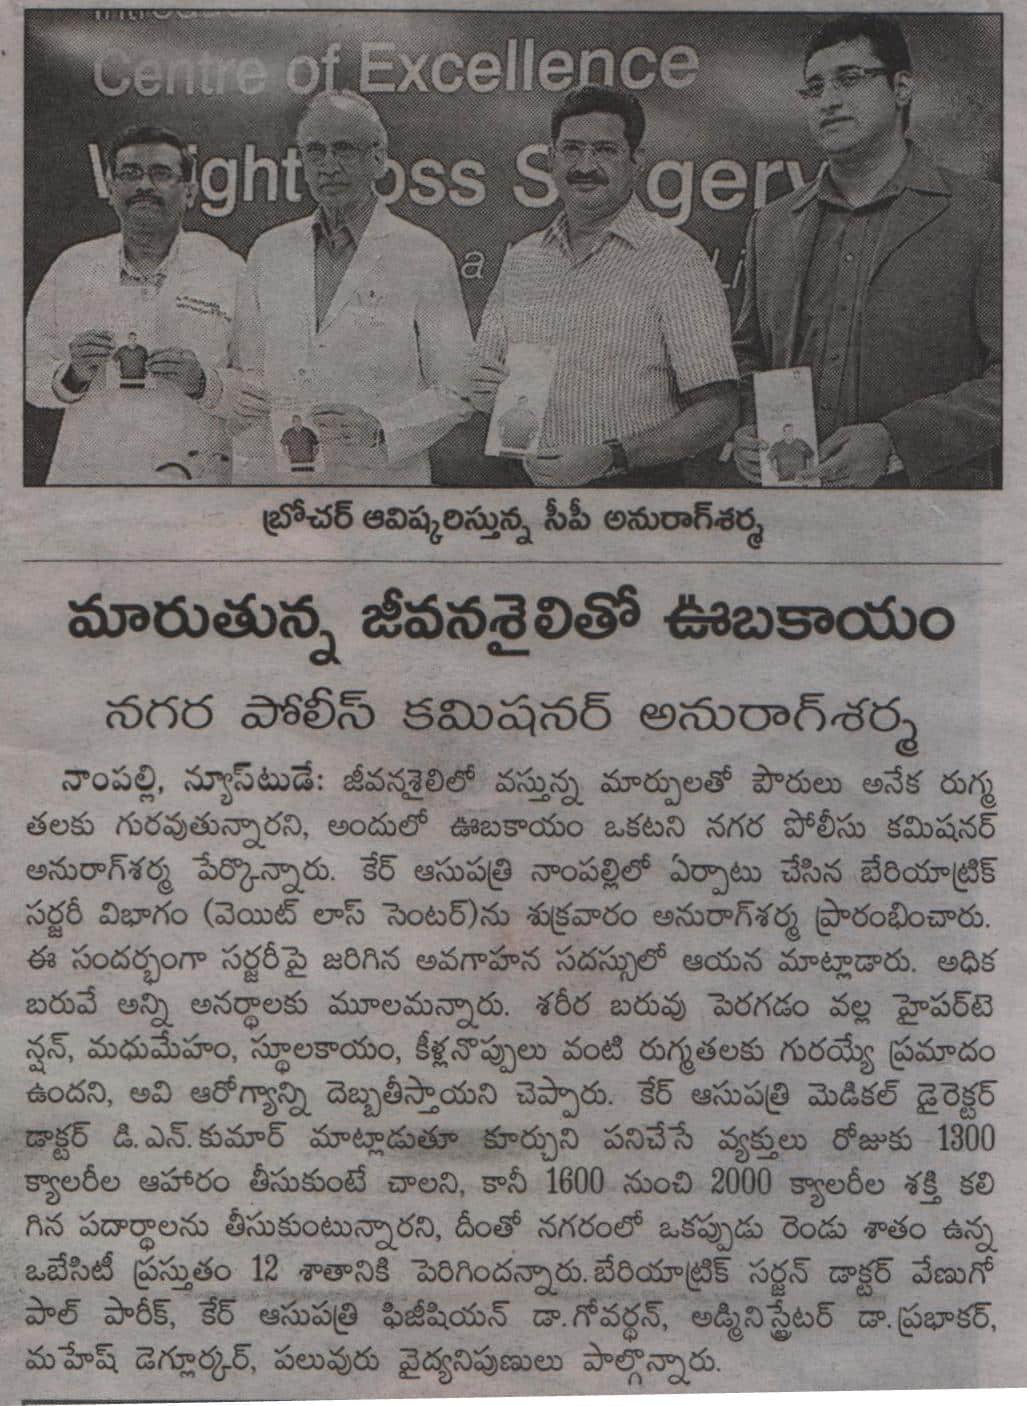 Dr V Pareek, Best bariatric Surgeon India is in news along with Hyderabad City Police Commissioner